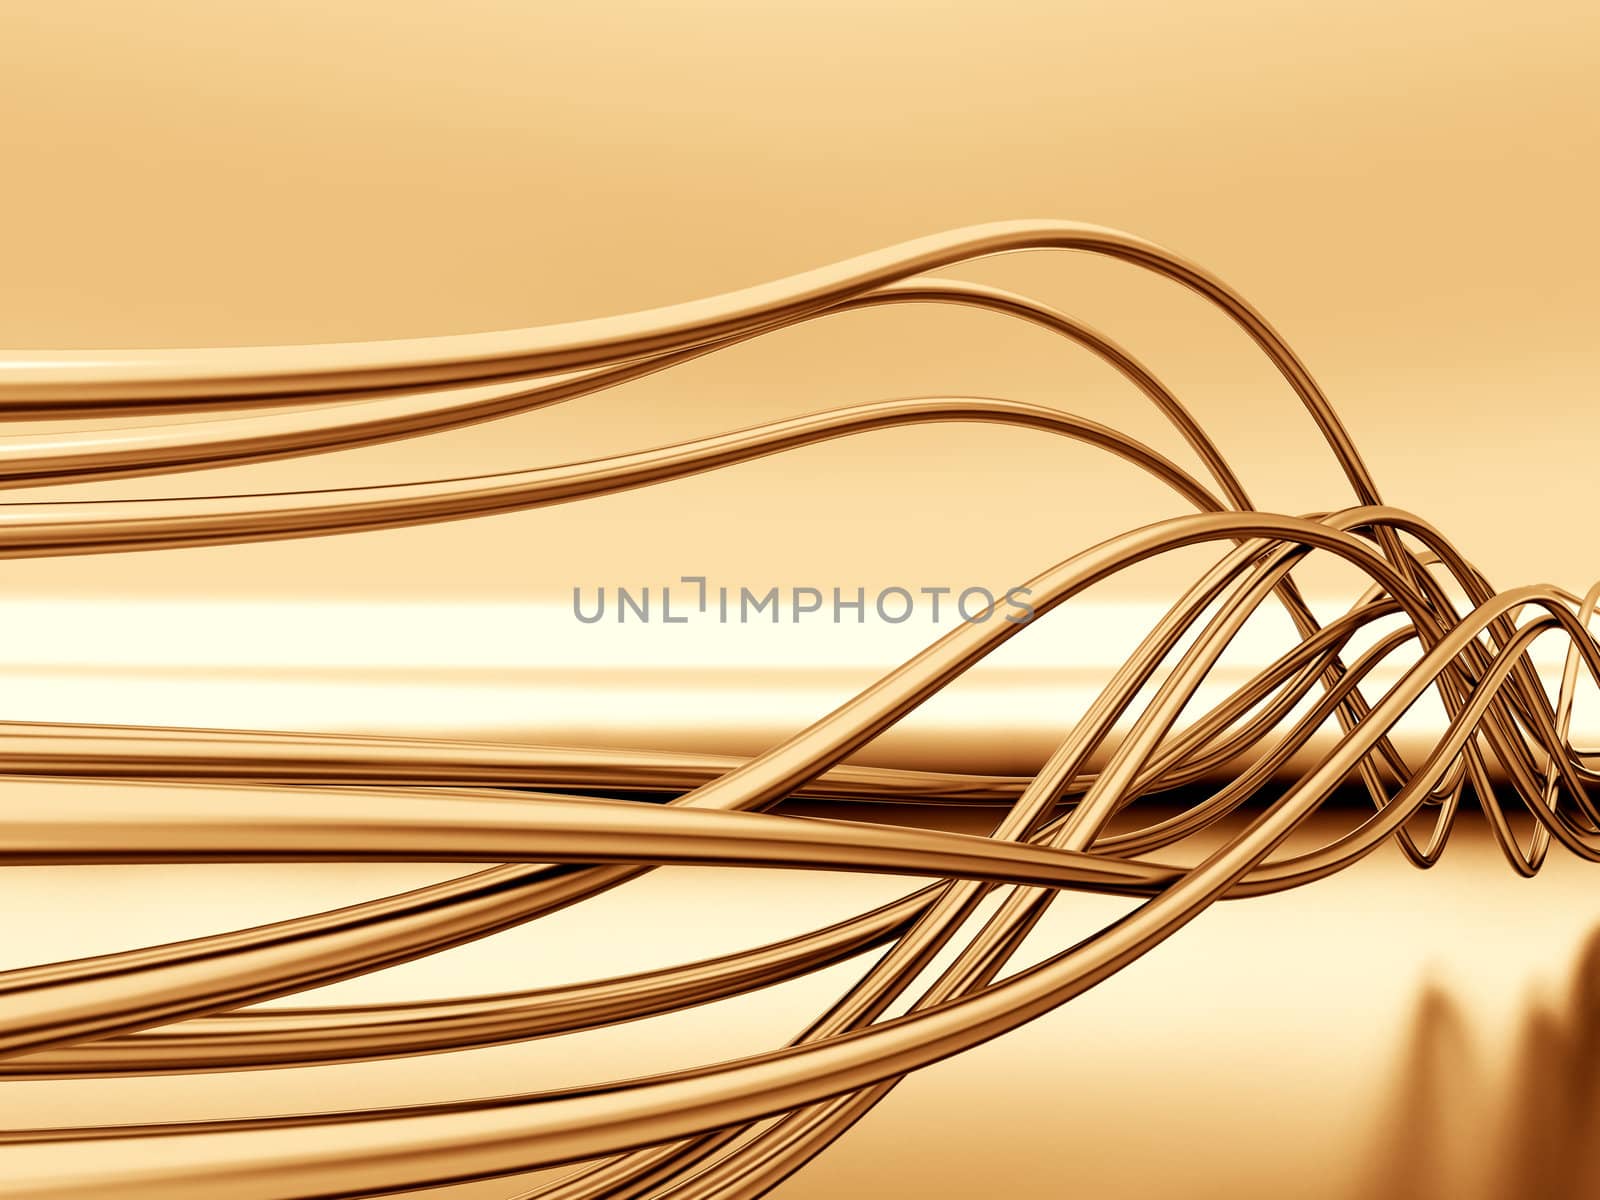 fibre-optical metal cables on a reflective background